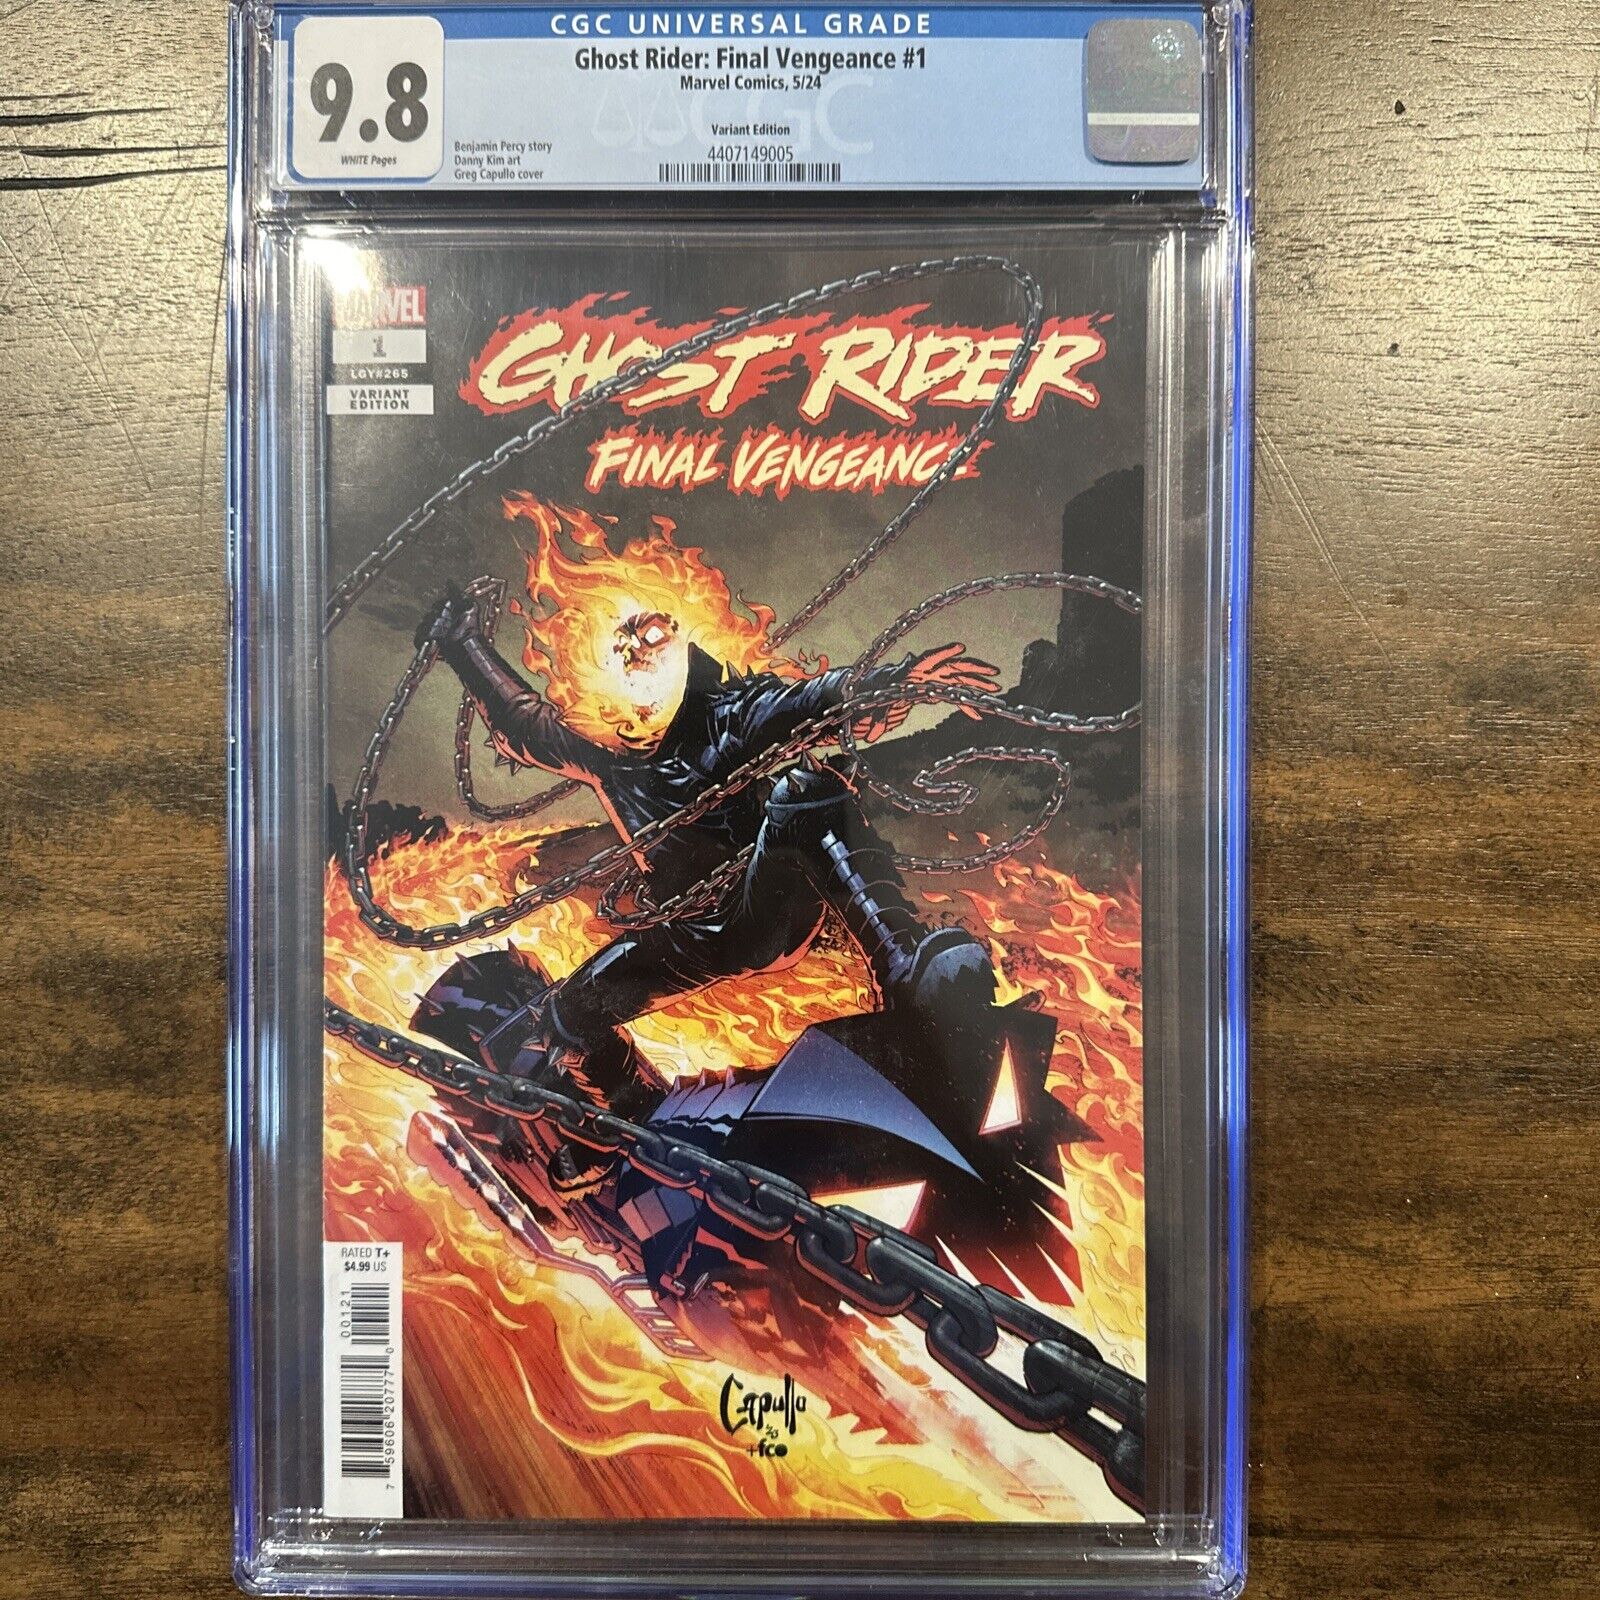 Ghost Rider:Final Vengeance #1 5/24 CGC 9.8 LGY #265 Variant Capullo Cover